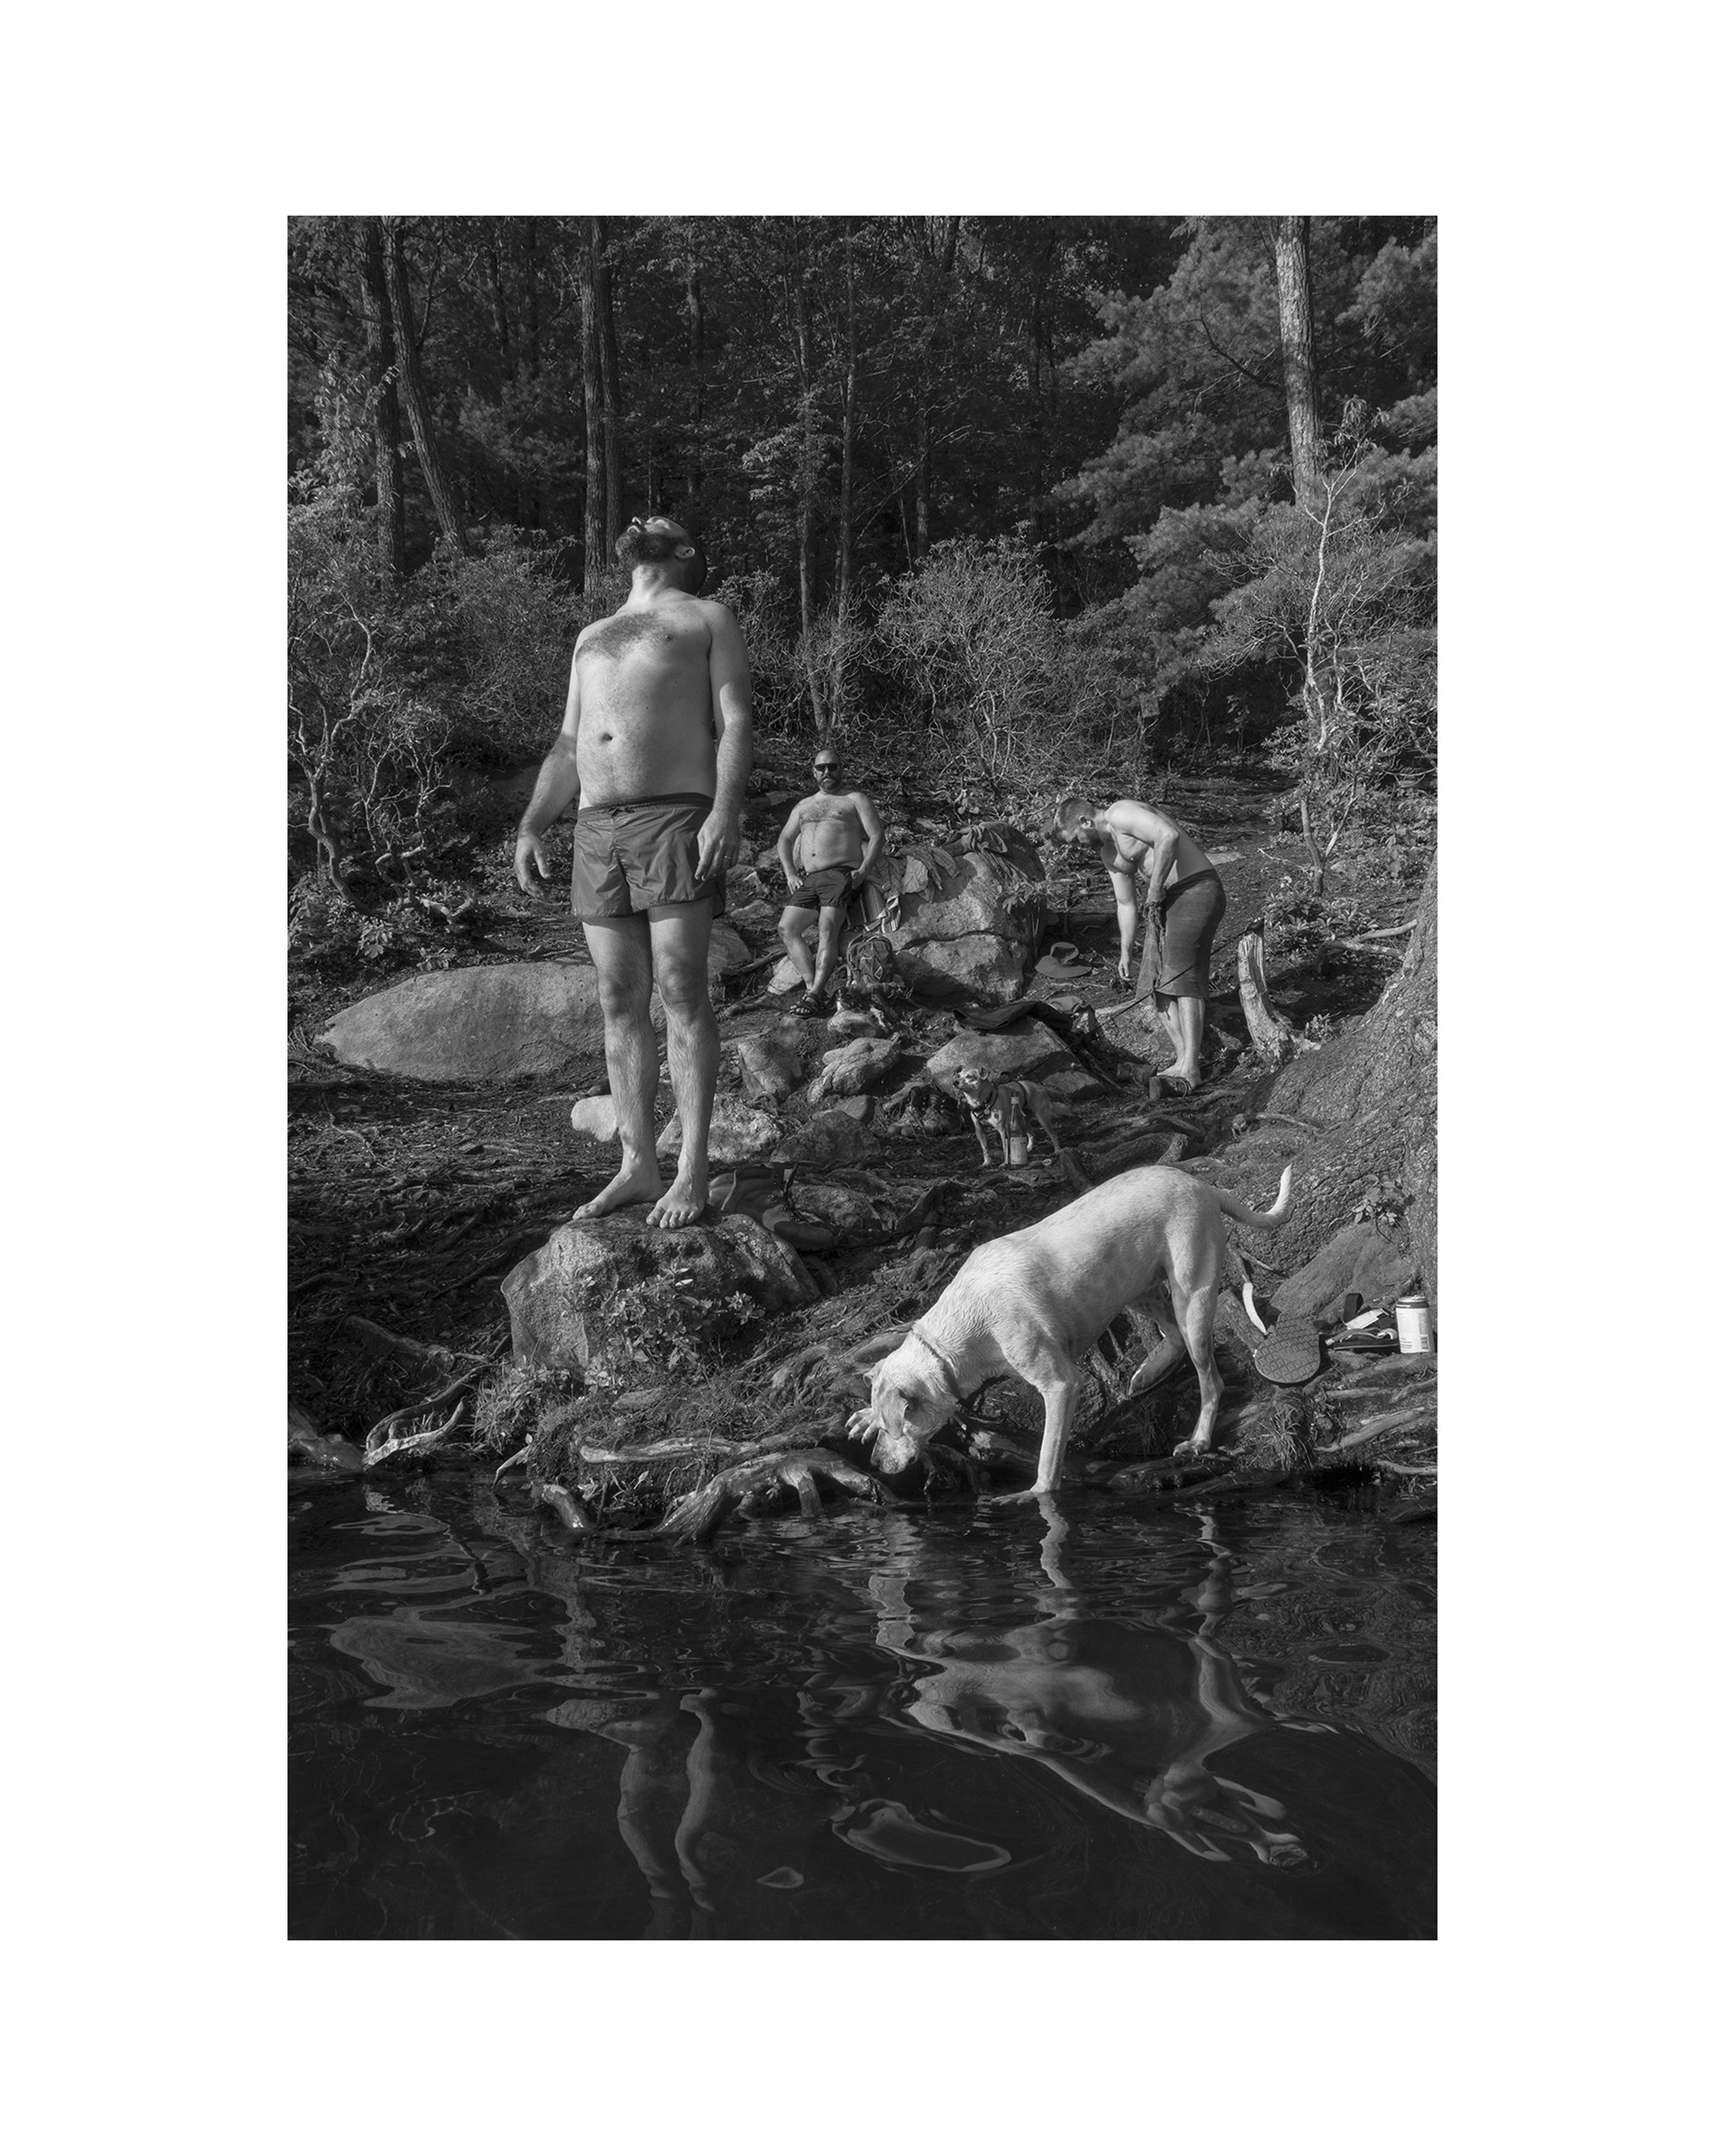   Nate, John, Ryan, Louis, &amp; Frankie at the Swimming Hole, Connecticut, 07.10.21  